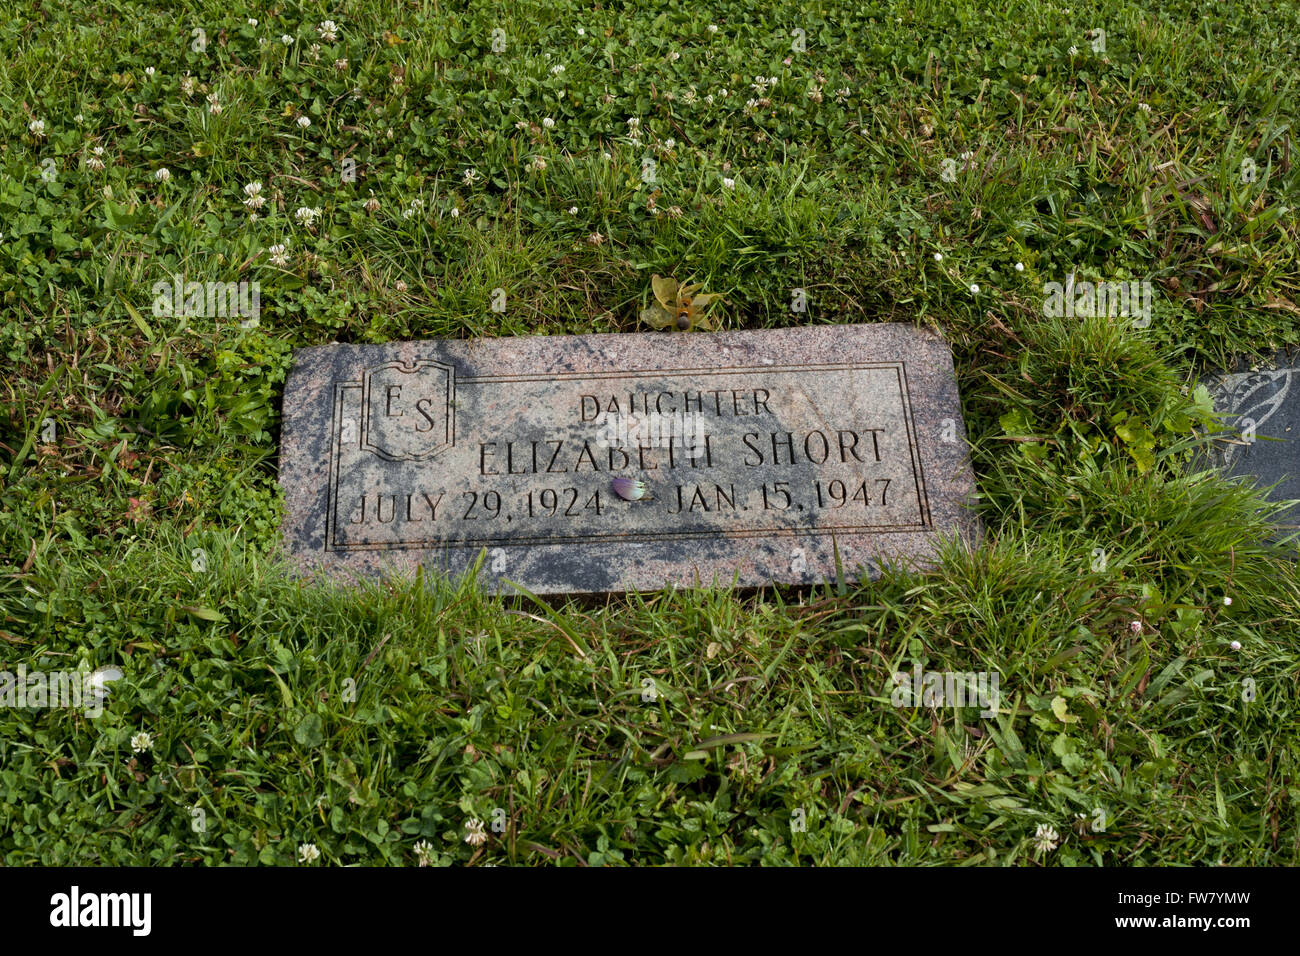 Celebrity final resting places - Mountain View Cemetery. The resting place of Elizabeth known